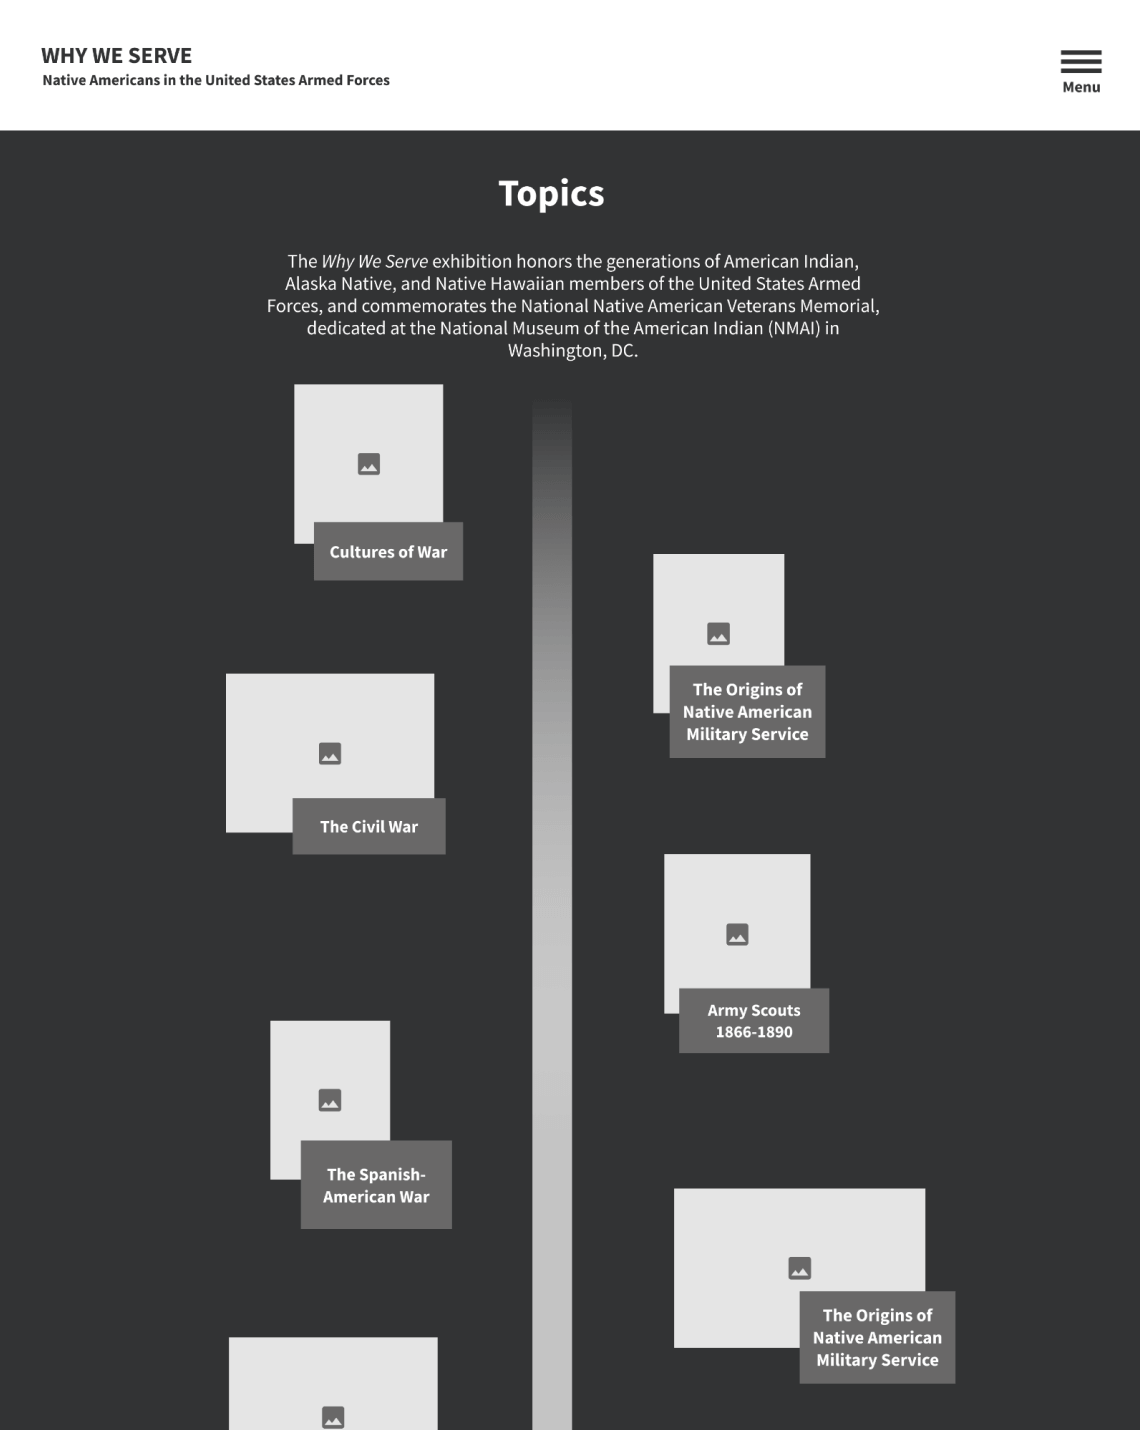 Final version of desktop wireframe for topic landing page